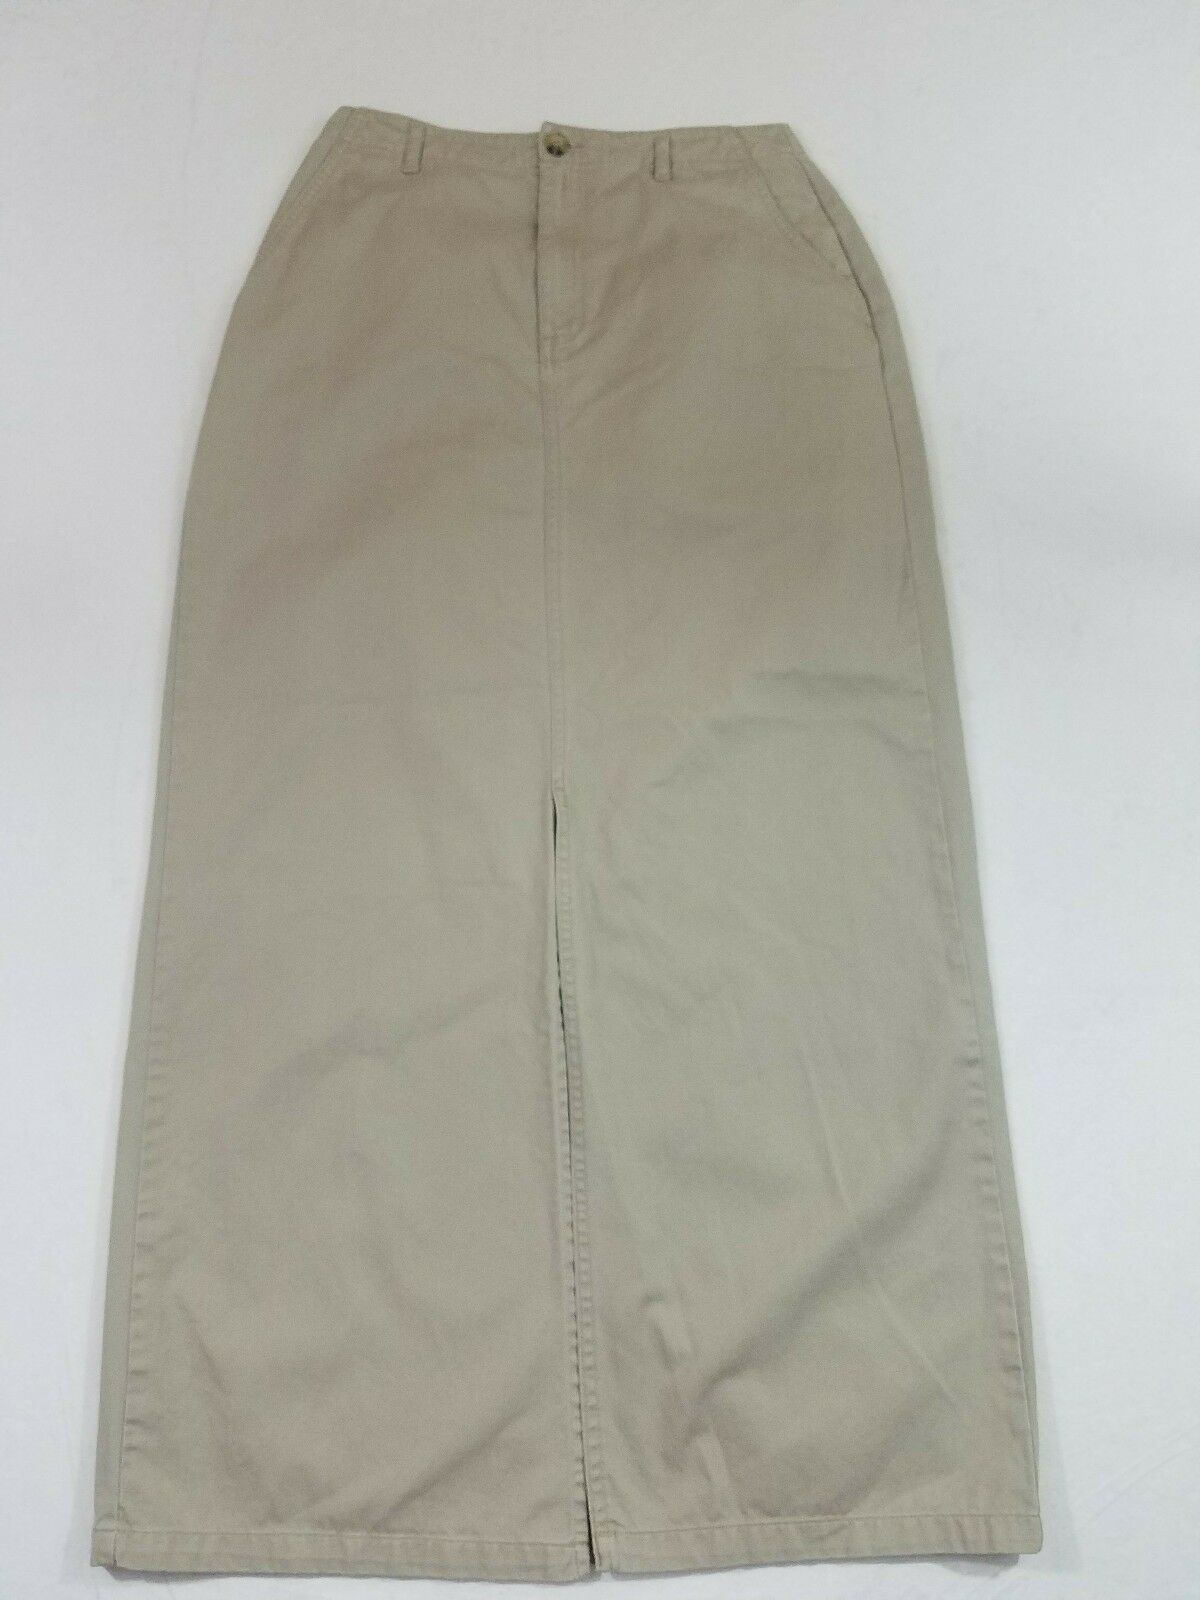 Primary image for St. Johns Bay Womens Long Jeans Skirt Front Slit Tan 100% Cotton Size 8T Tall